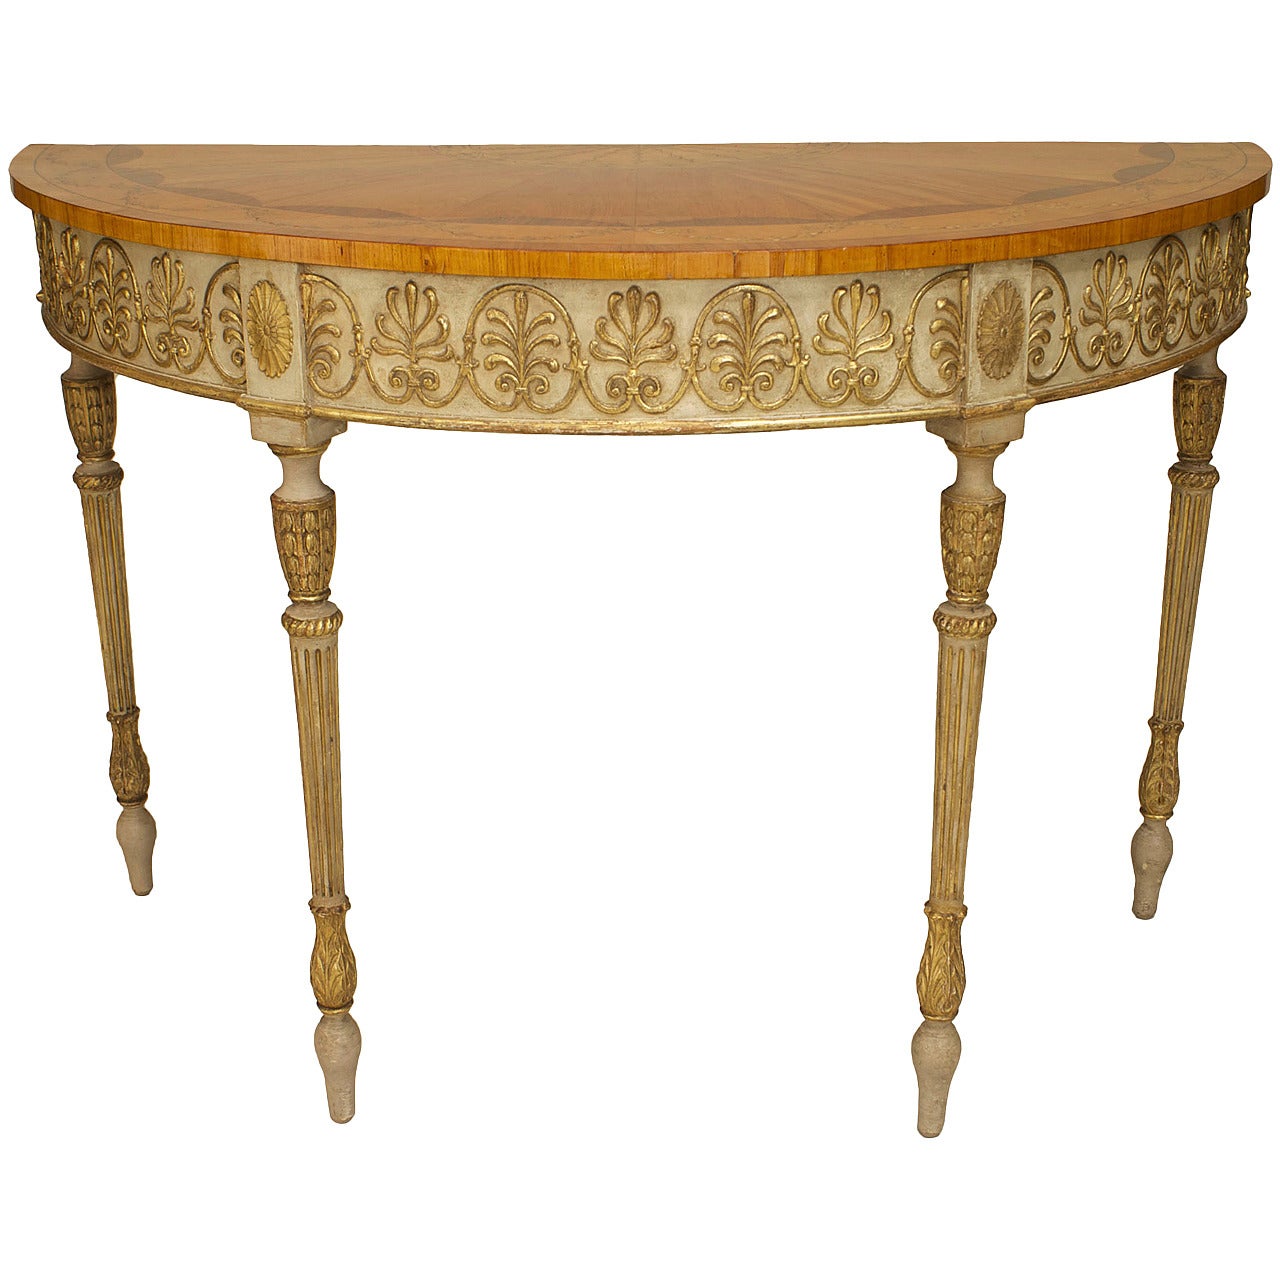 English George III Painted and Gilt Console Table For Sale